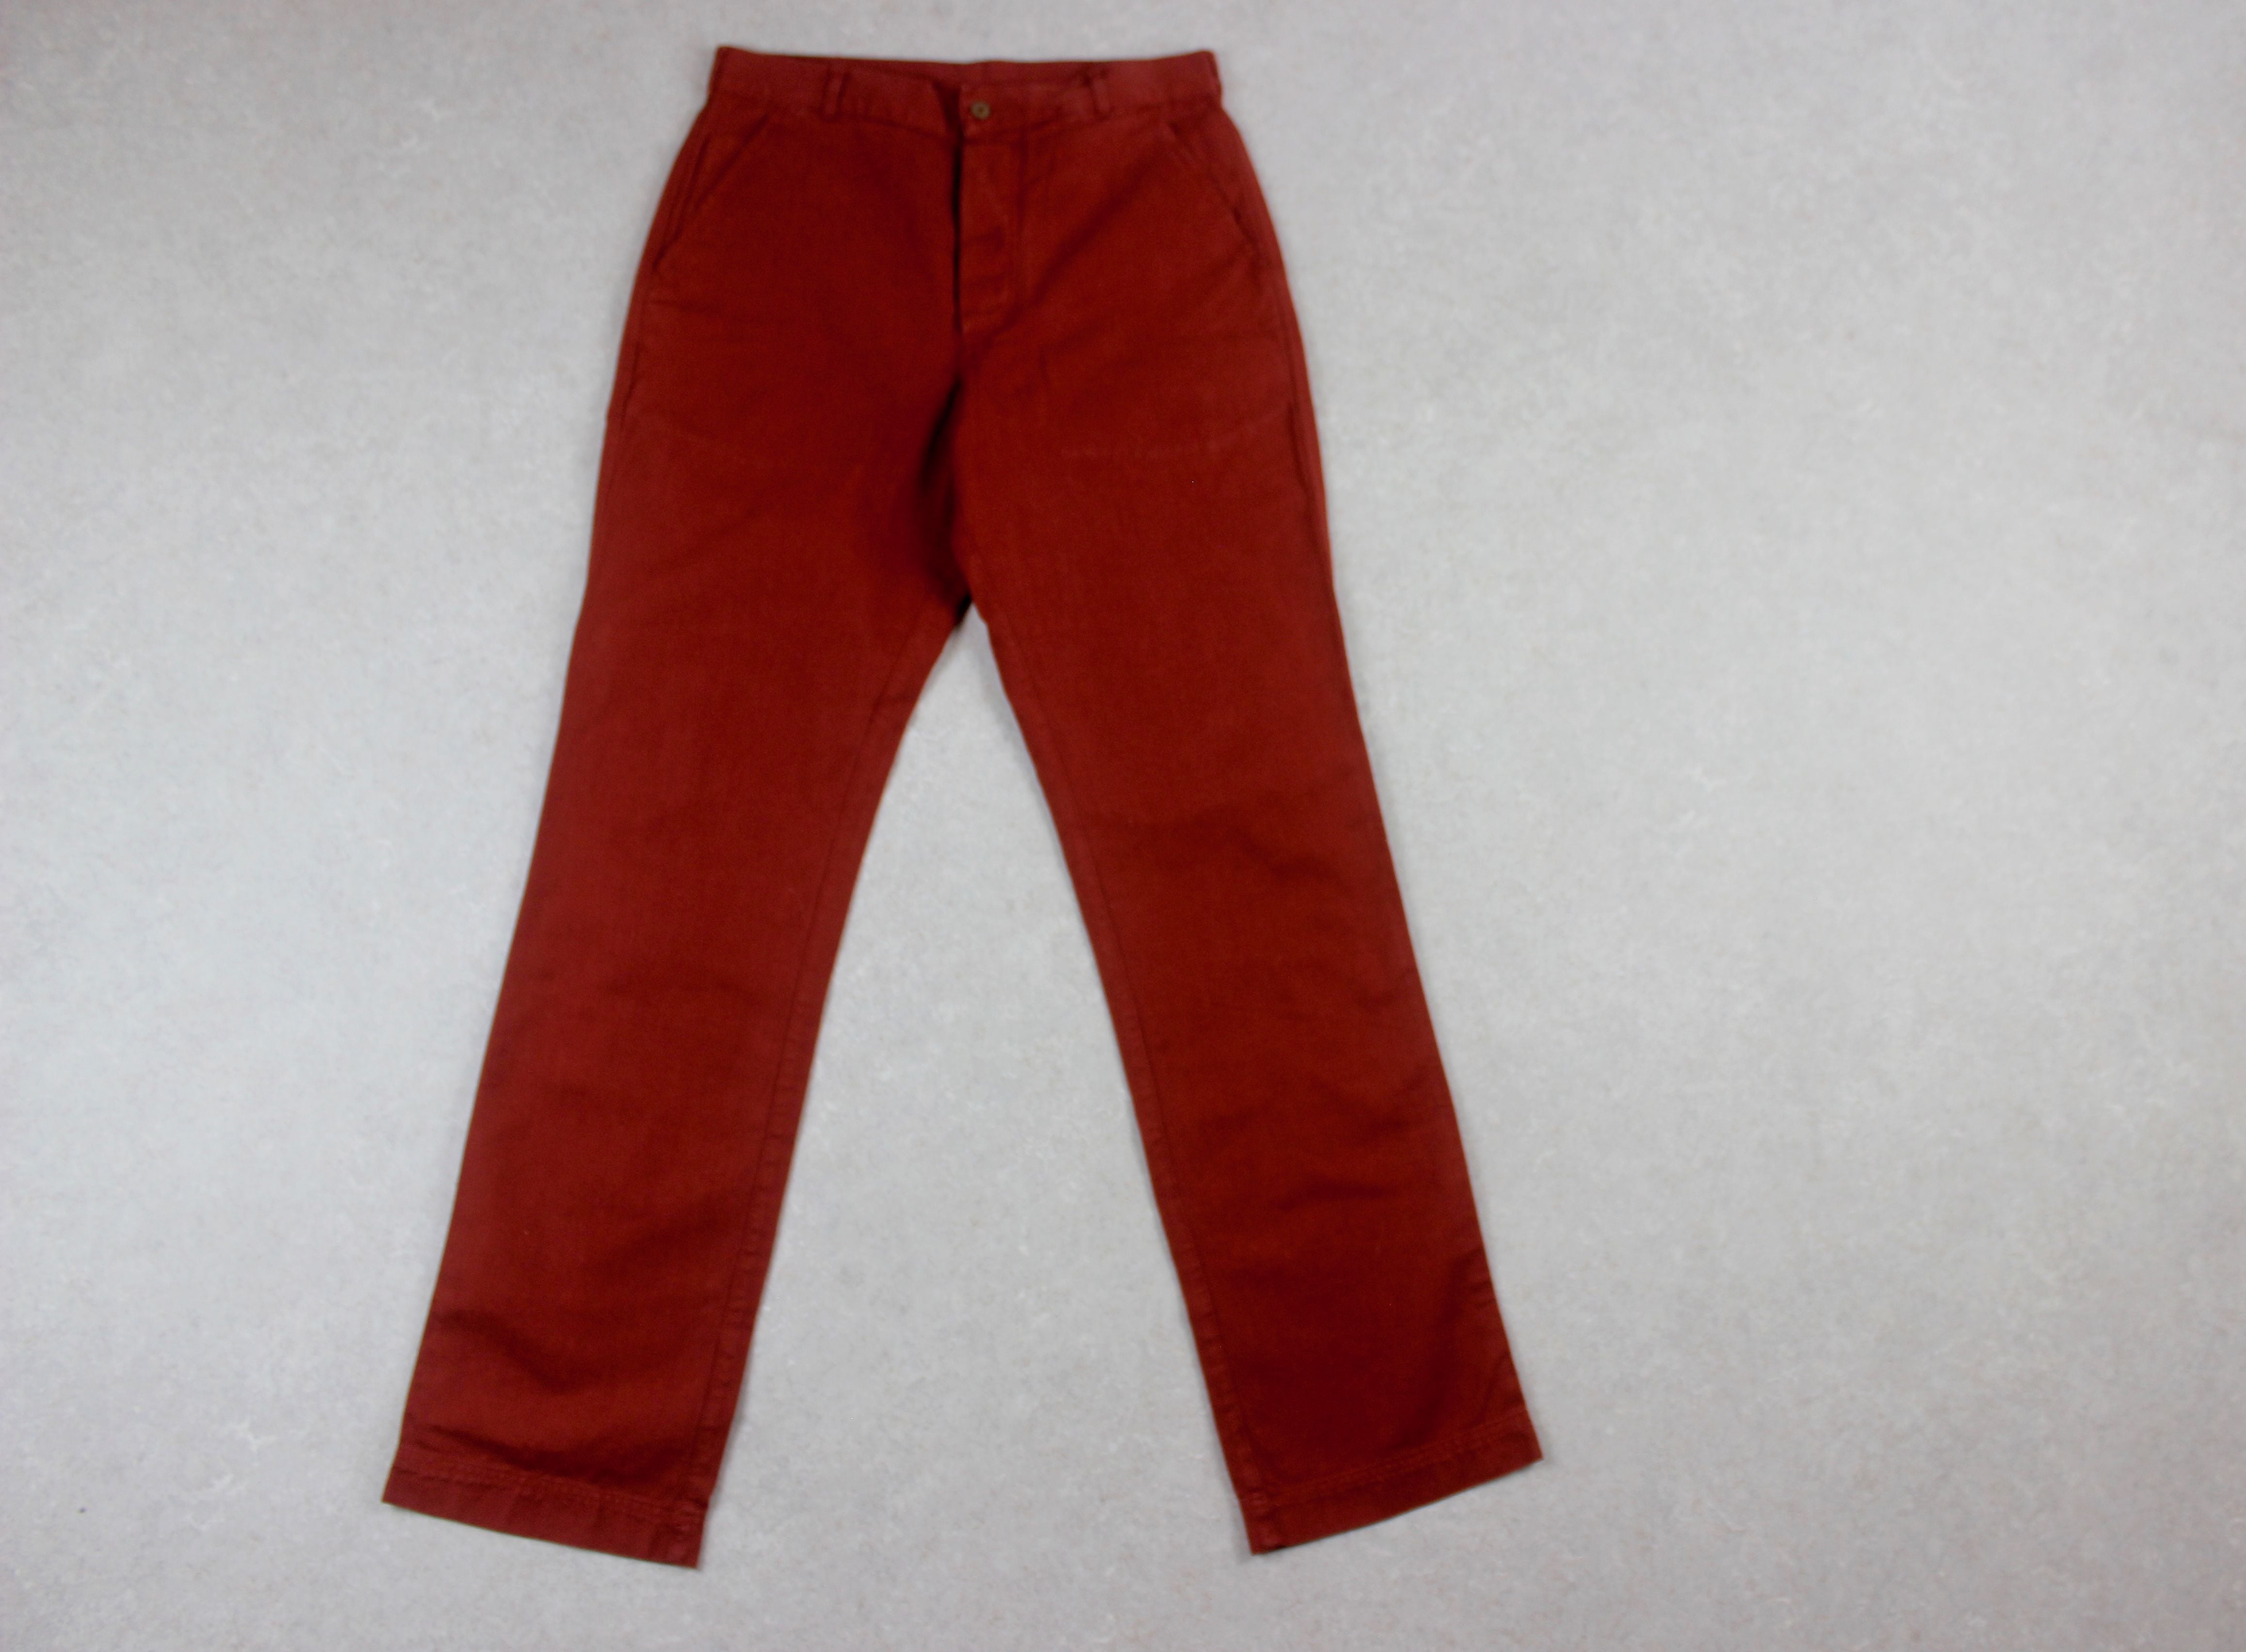 MHL Margaret Howell - Fatigue Trousers - Red - Small